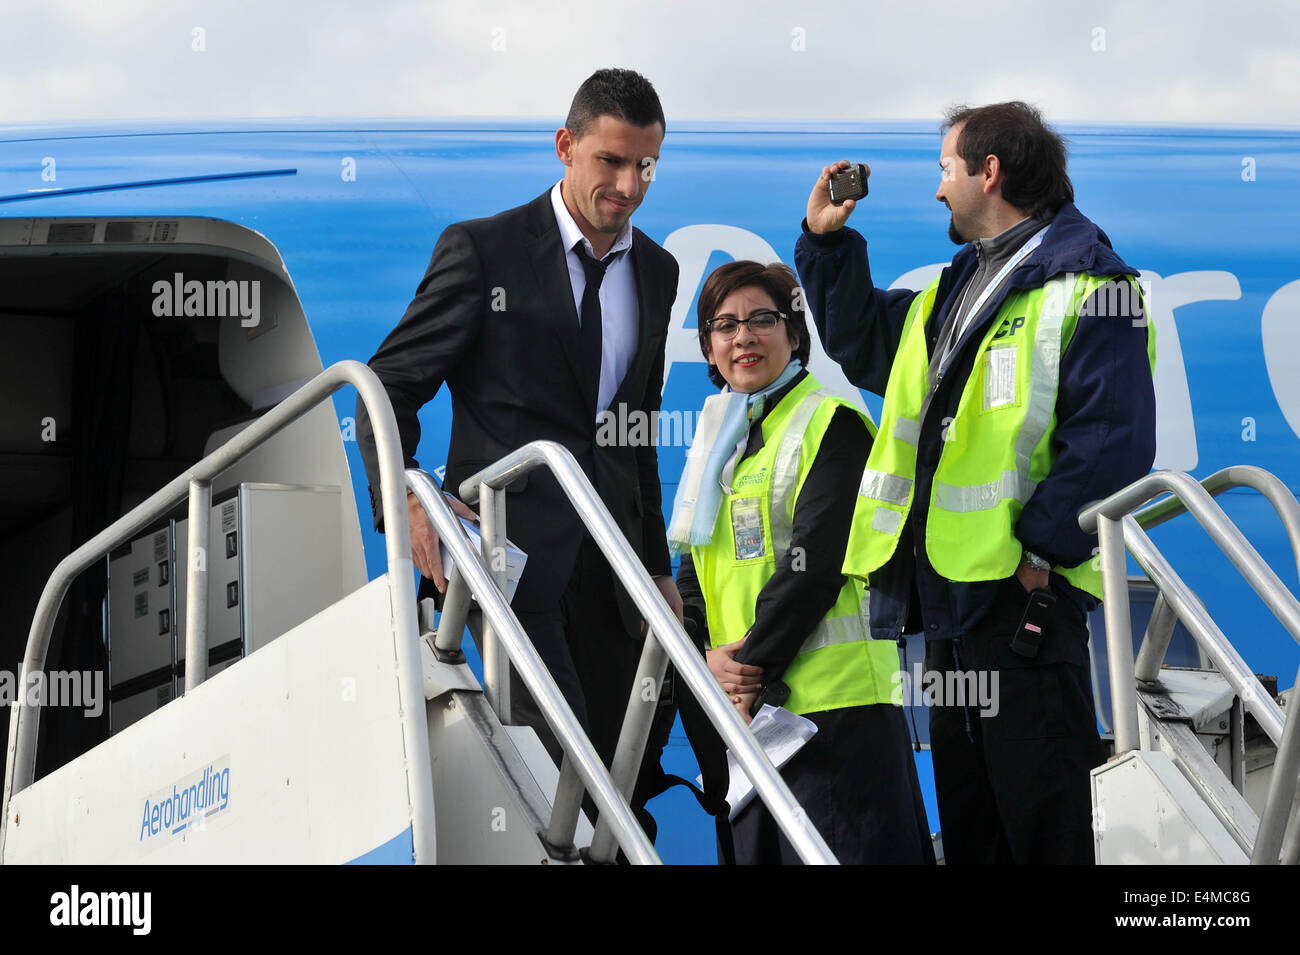 Ezeiza, Argentina. 14th July, 2014. Maxi Rodriguez (L) of Argentina National Team descends of the plane in the Minister Pistarini International Airport, in the city of Ezeiza, Argentina, on July 14, 2014. Argentina National Team returned after won the silver in the 2014 FIFA World Cup Brazil. Credit:  Leonardo Zavattaro/TELAM/Xinhua/Alamy Live News Stock Photo